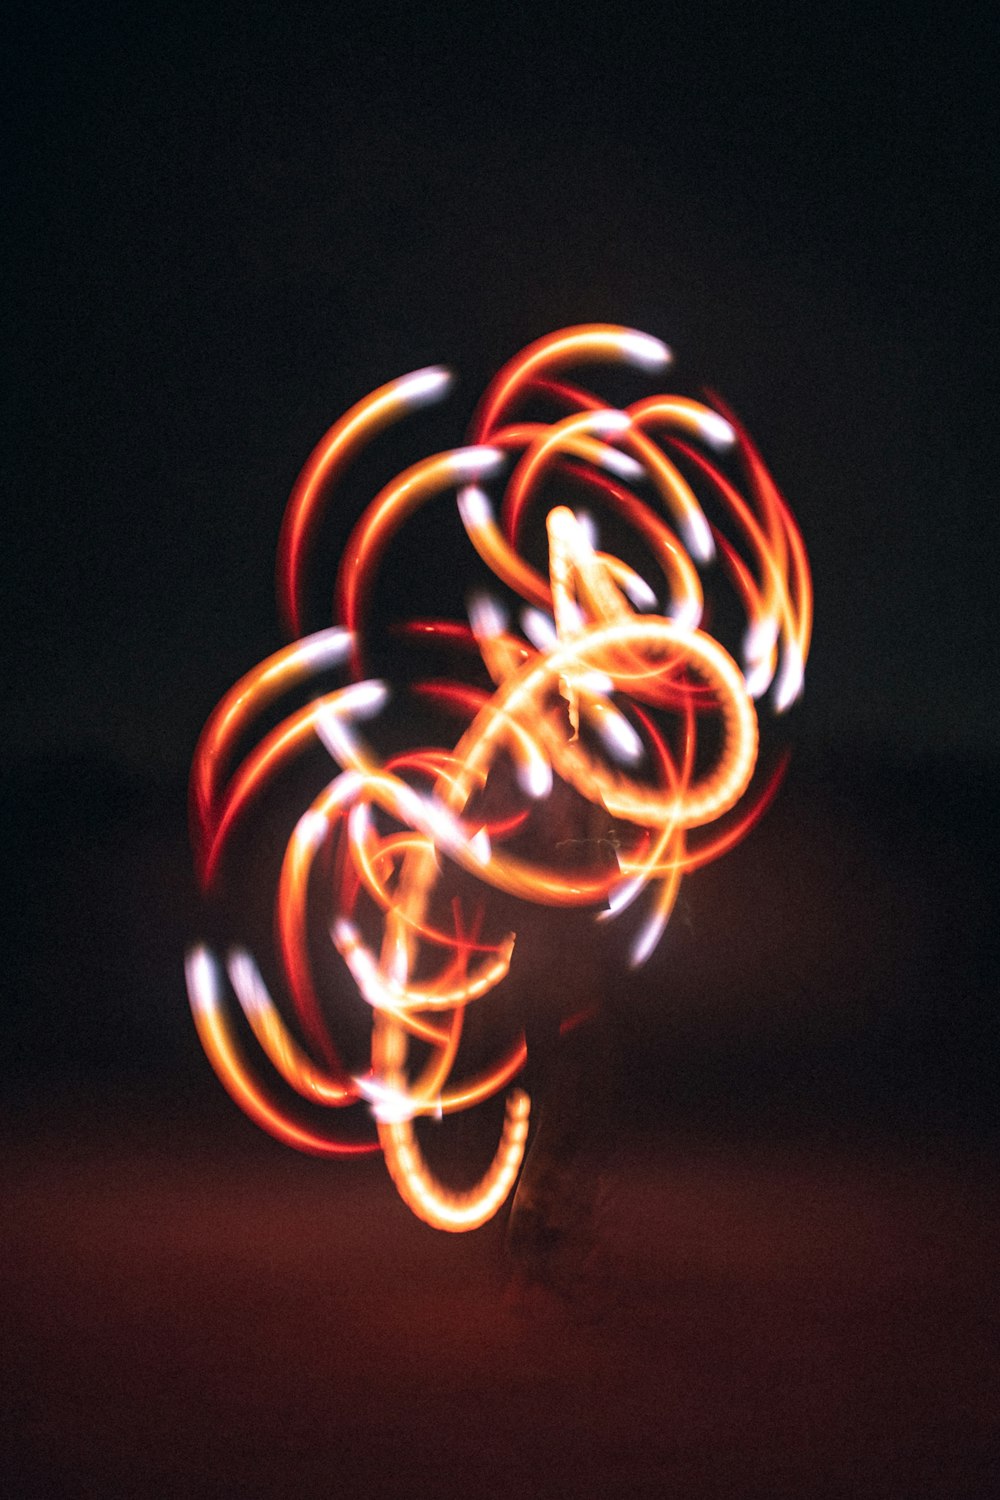 a blurry photo of a person holding a light